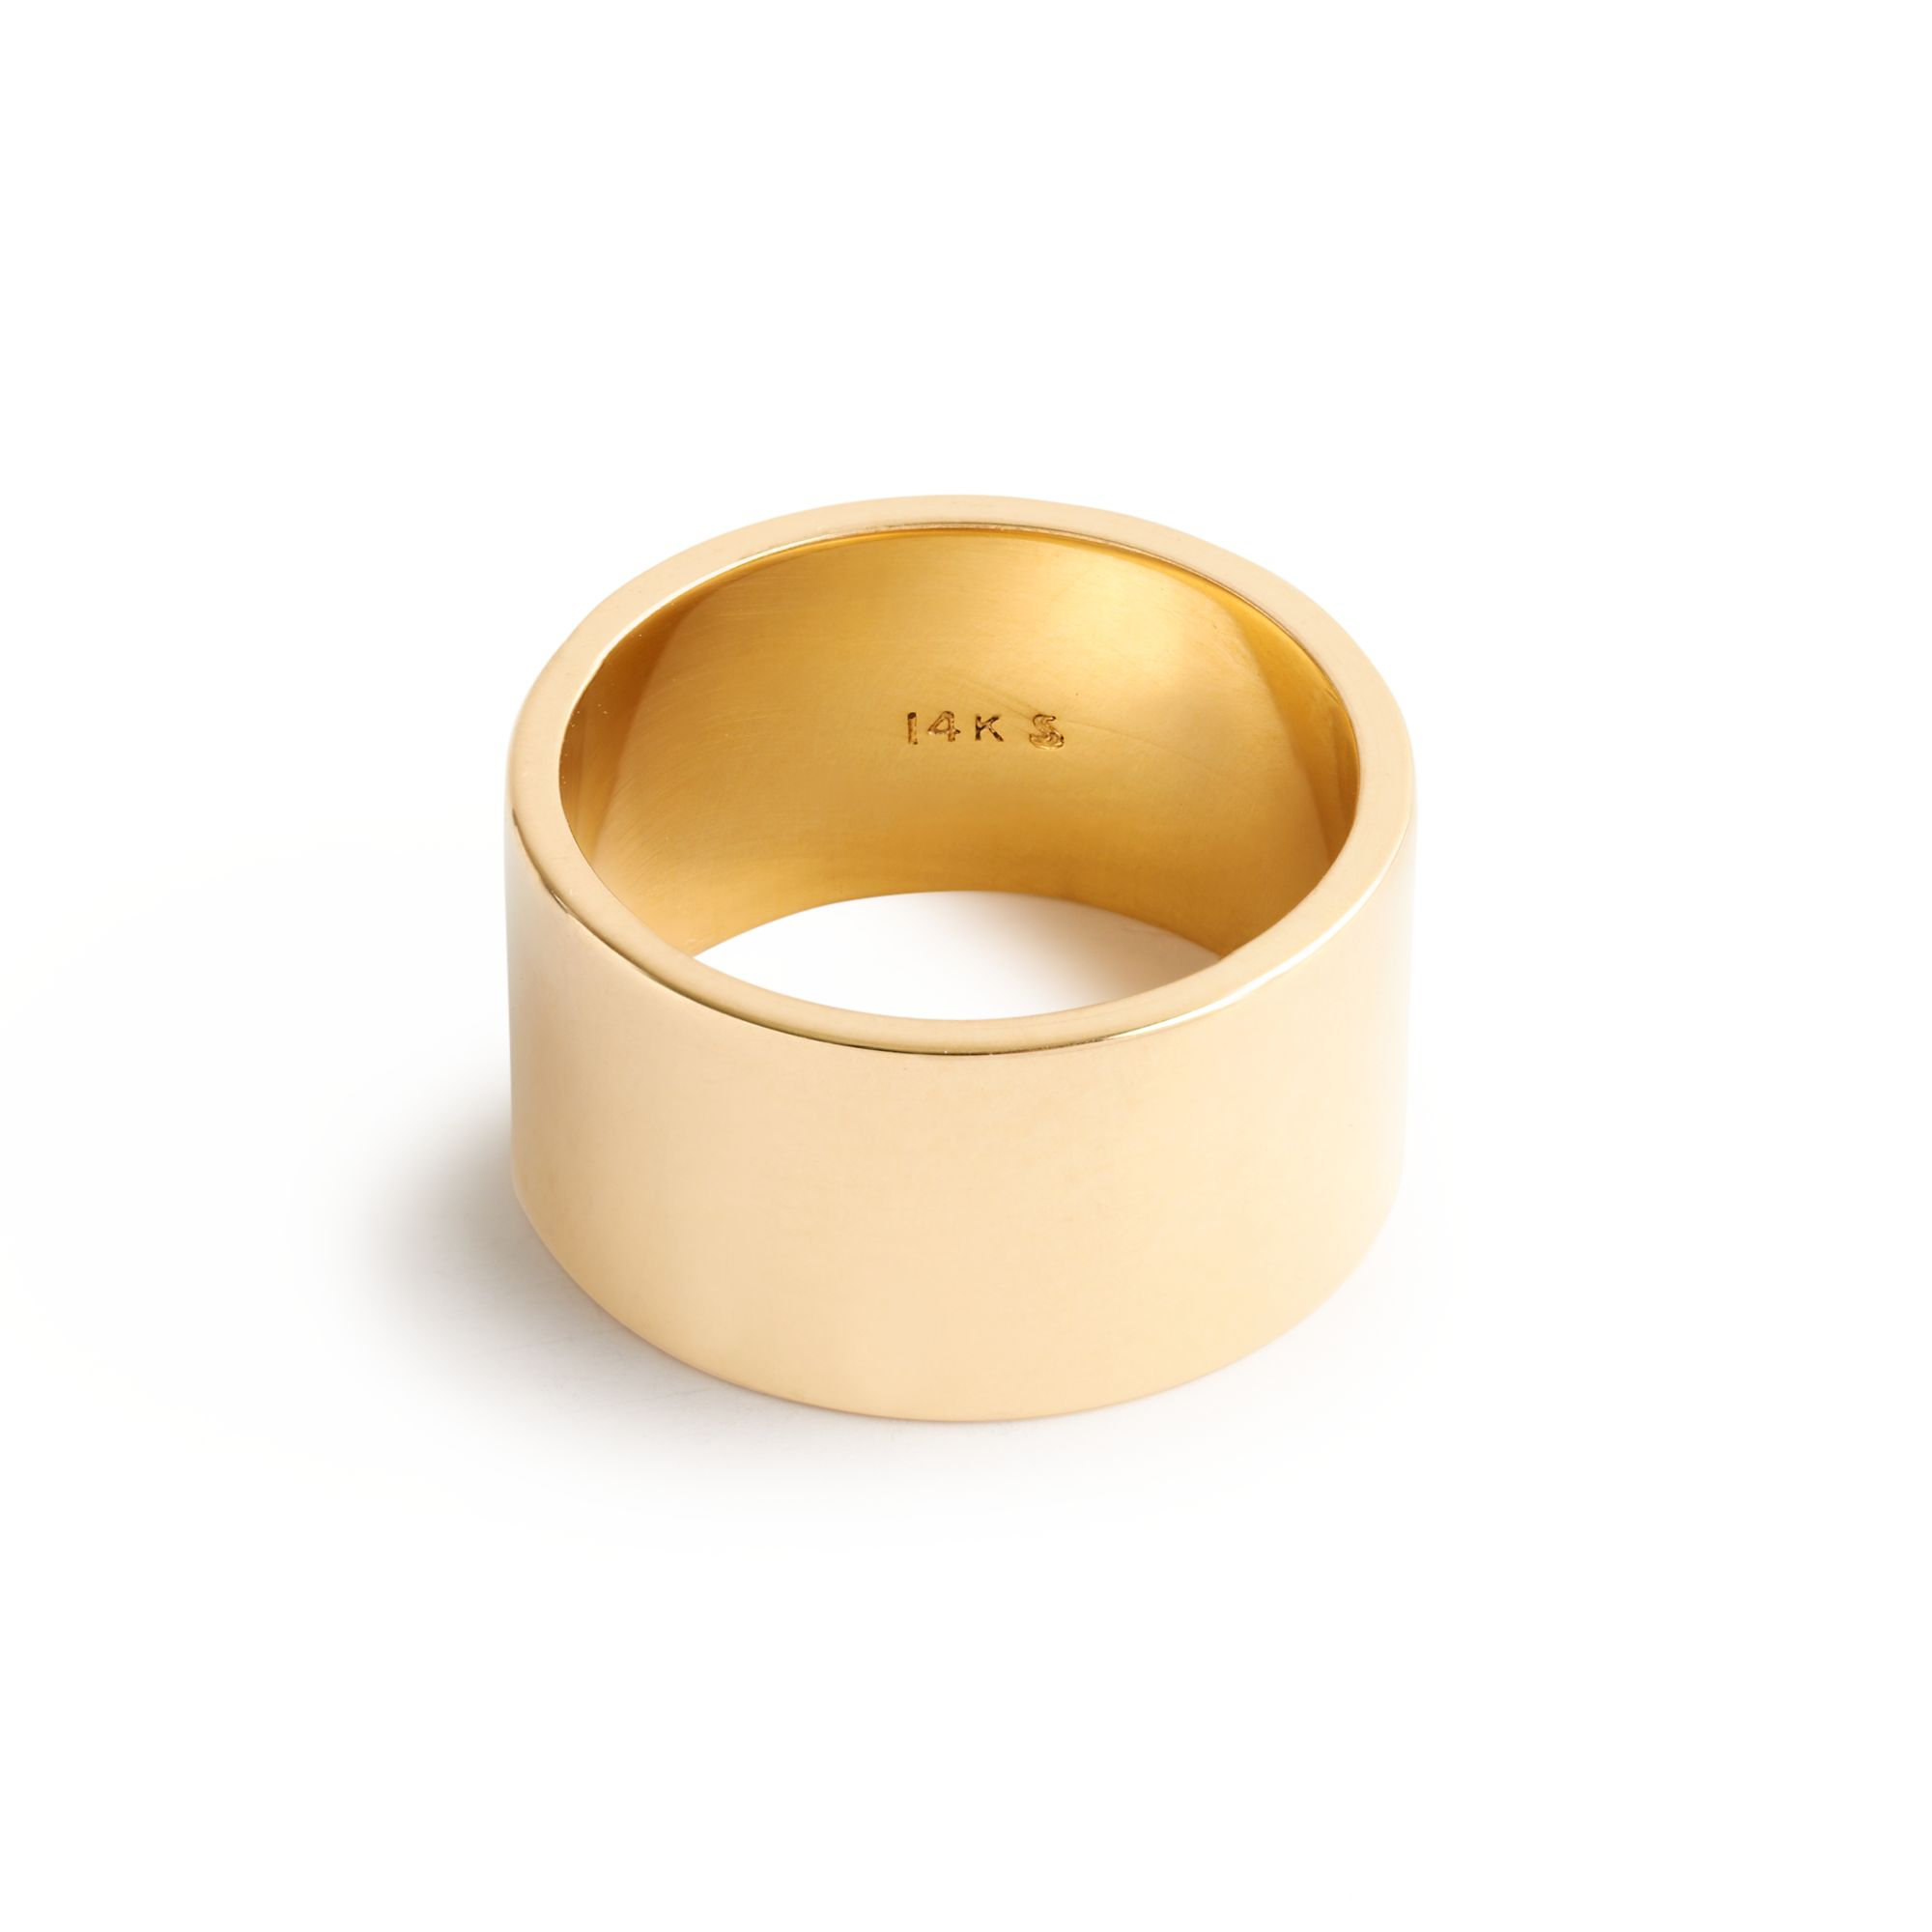 J.crew Brvtvs Thick 14k Gold Ring in Gold (yellow gold) | Lyst